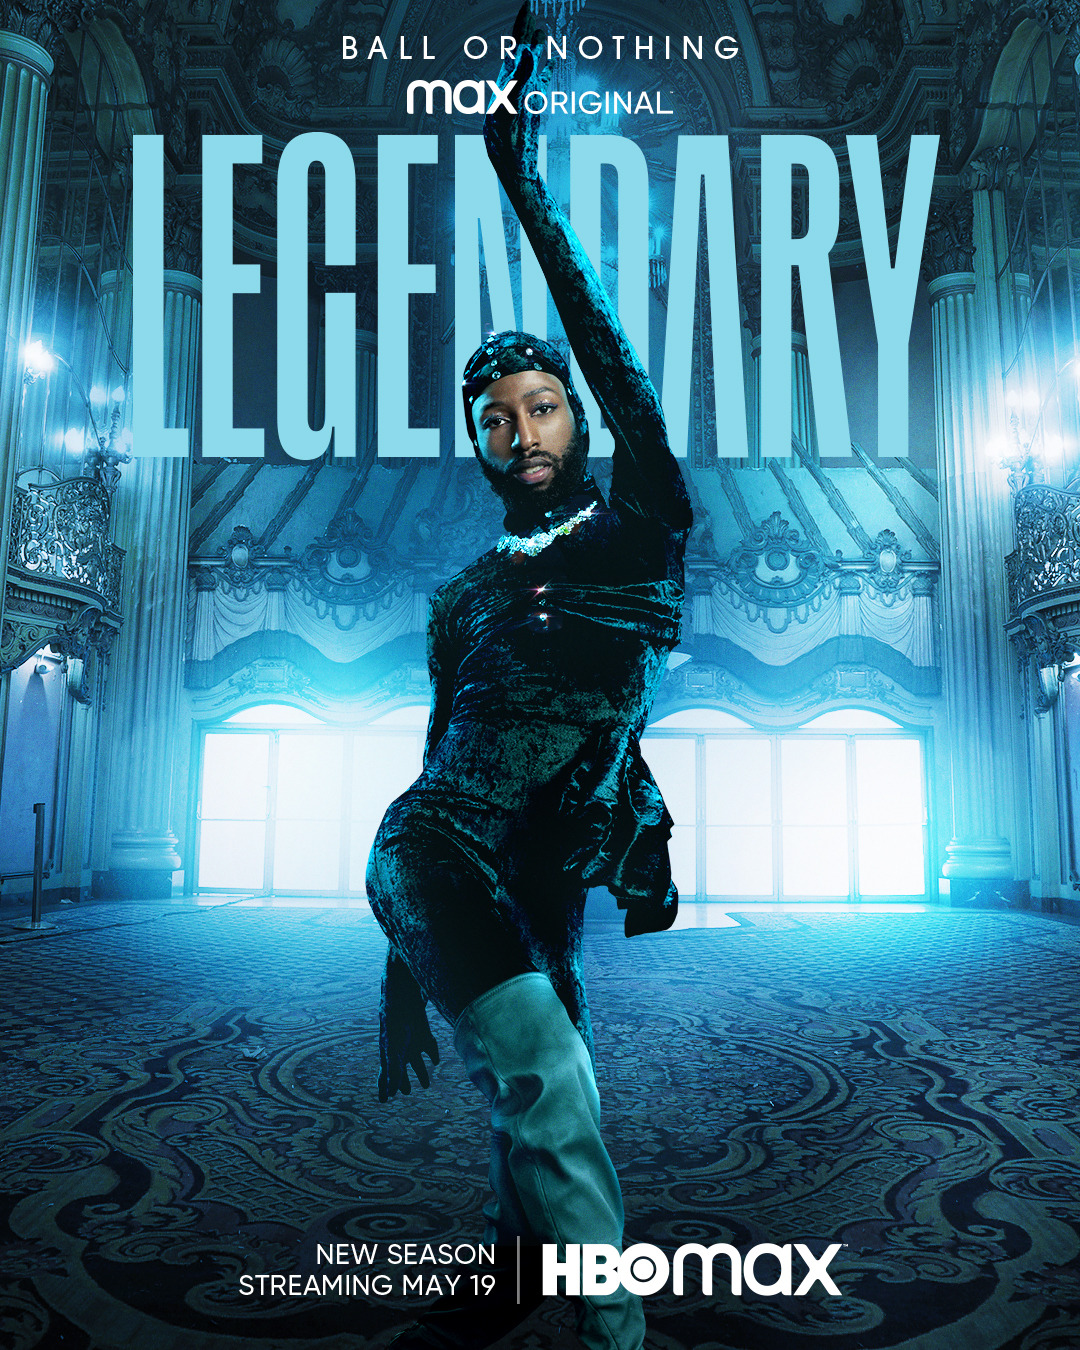 Extra Large TV Poster Image for Legendary (#152 of 173)